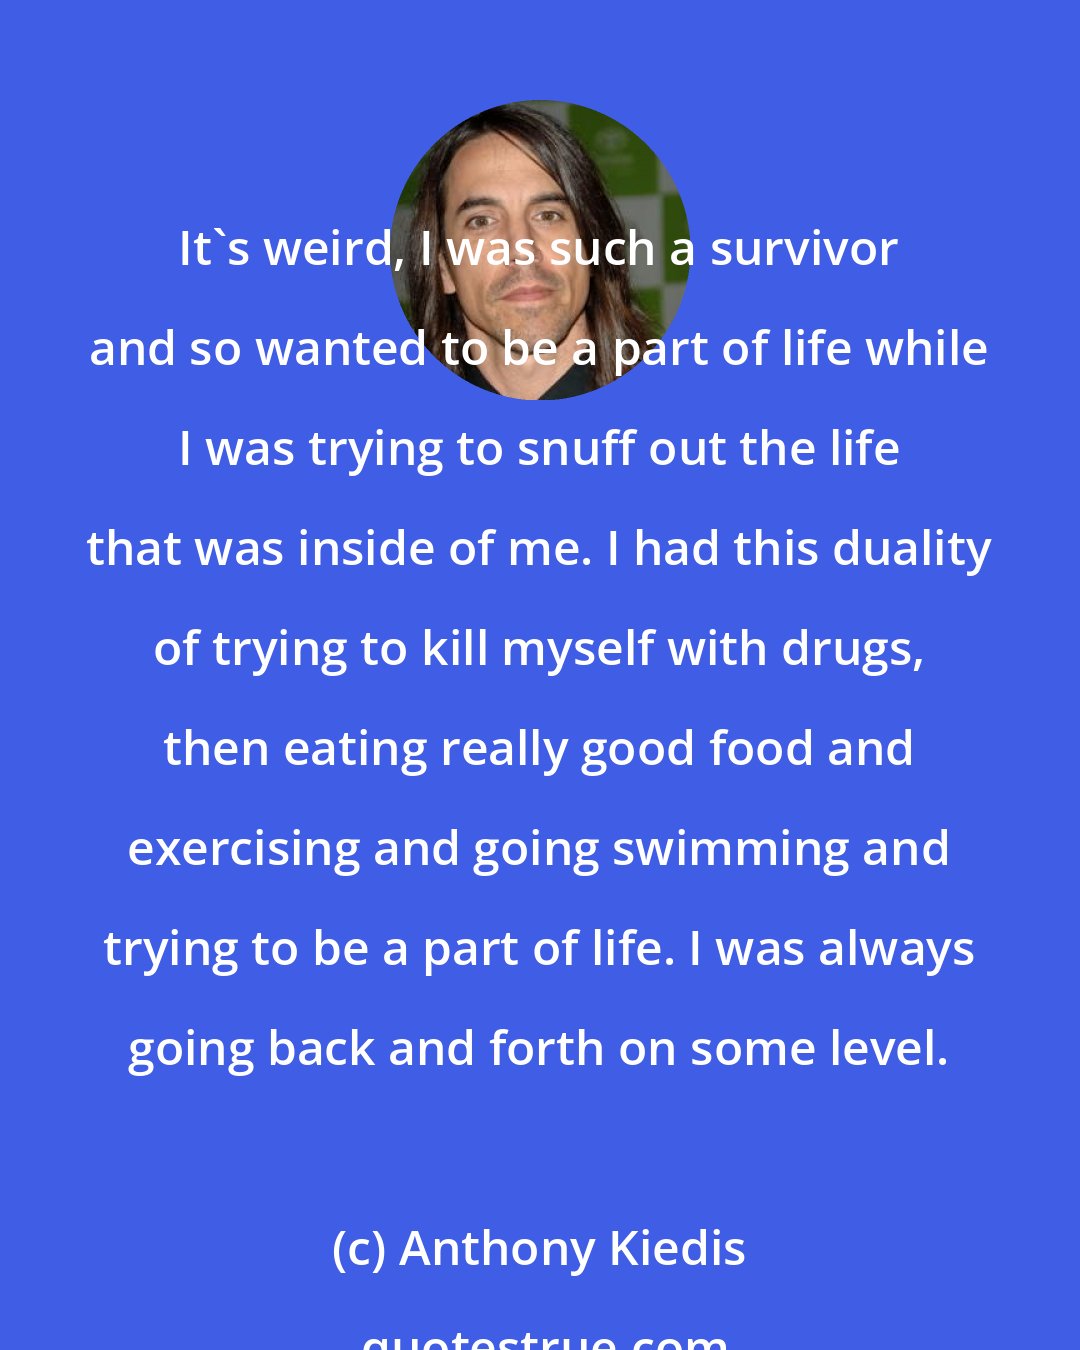 Anthony Kiedis: It's weird, I was such a survivor and so wanted to be a part of life while I was trying to snuff out the life that was inside of me. I had this duality of trying to kill myself with drugs, then eating really good food and exercising and going swimming and trying to be a part of life. I was always going back and forth on some level.